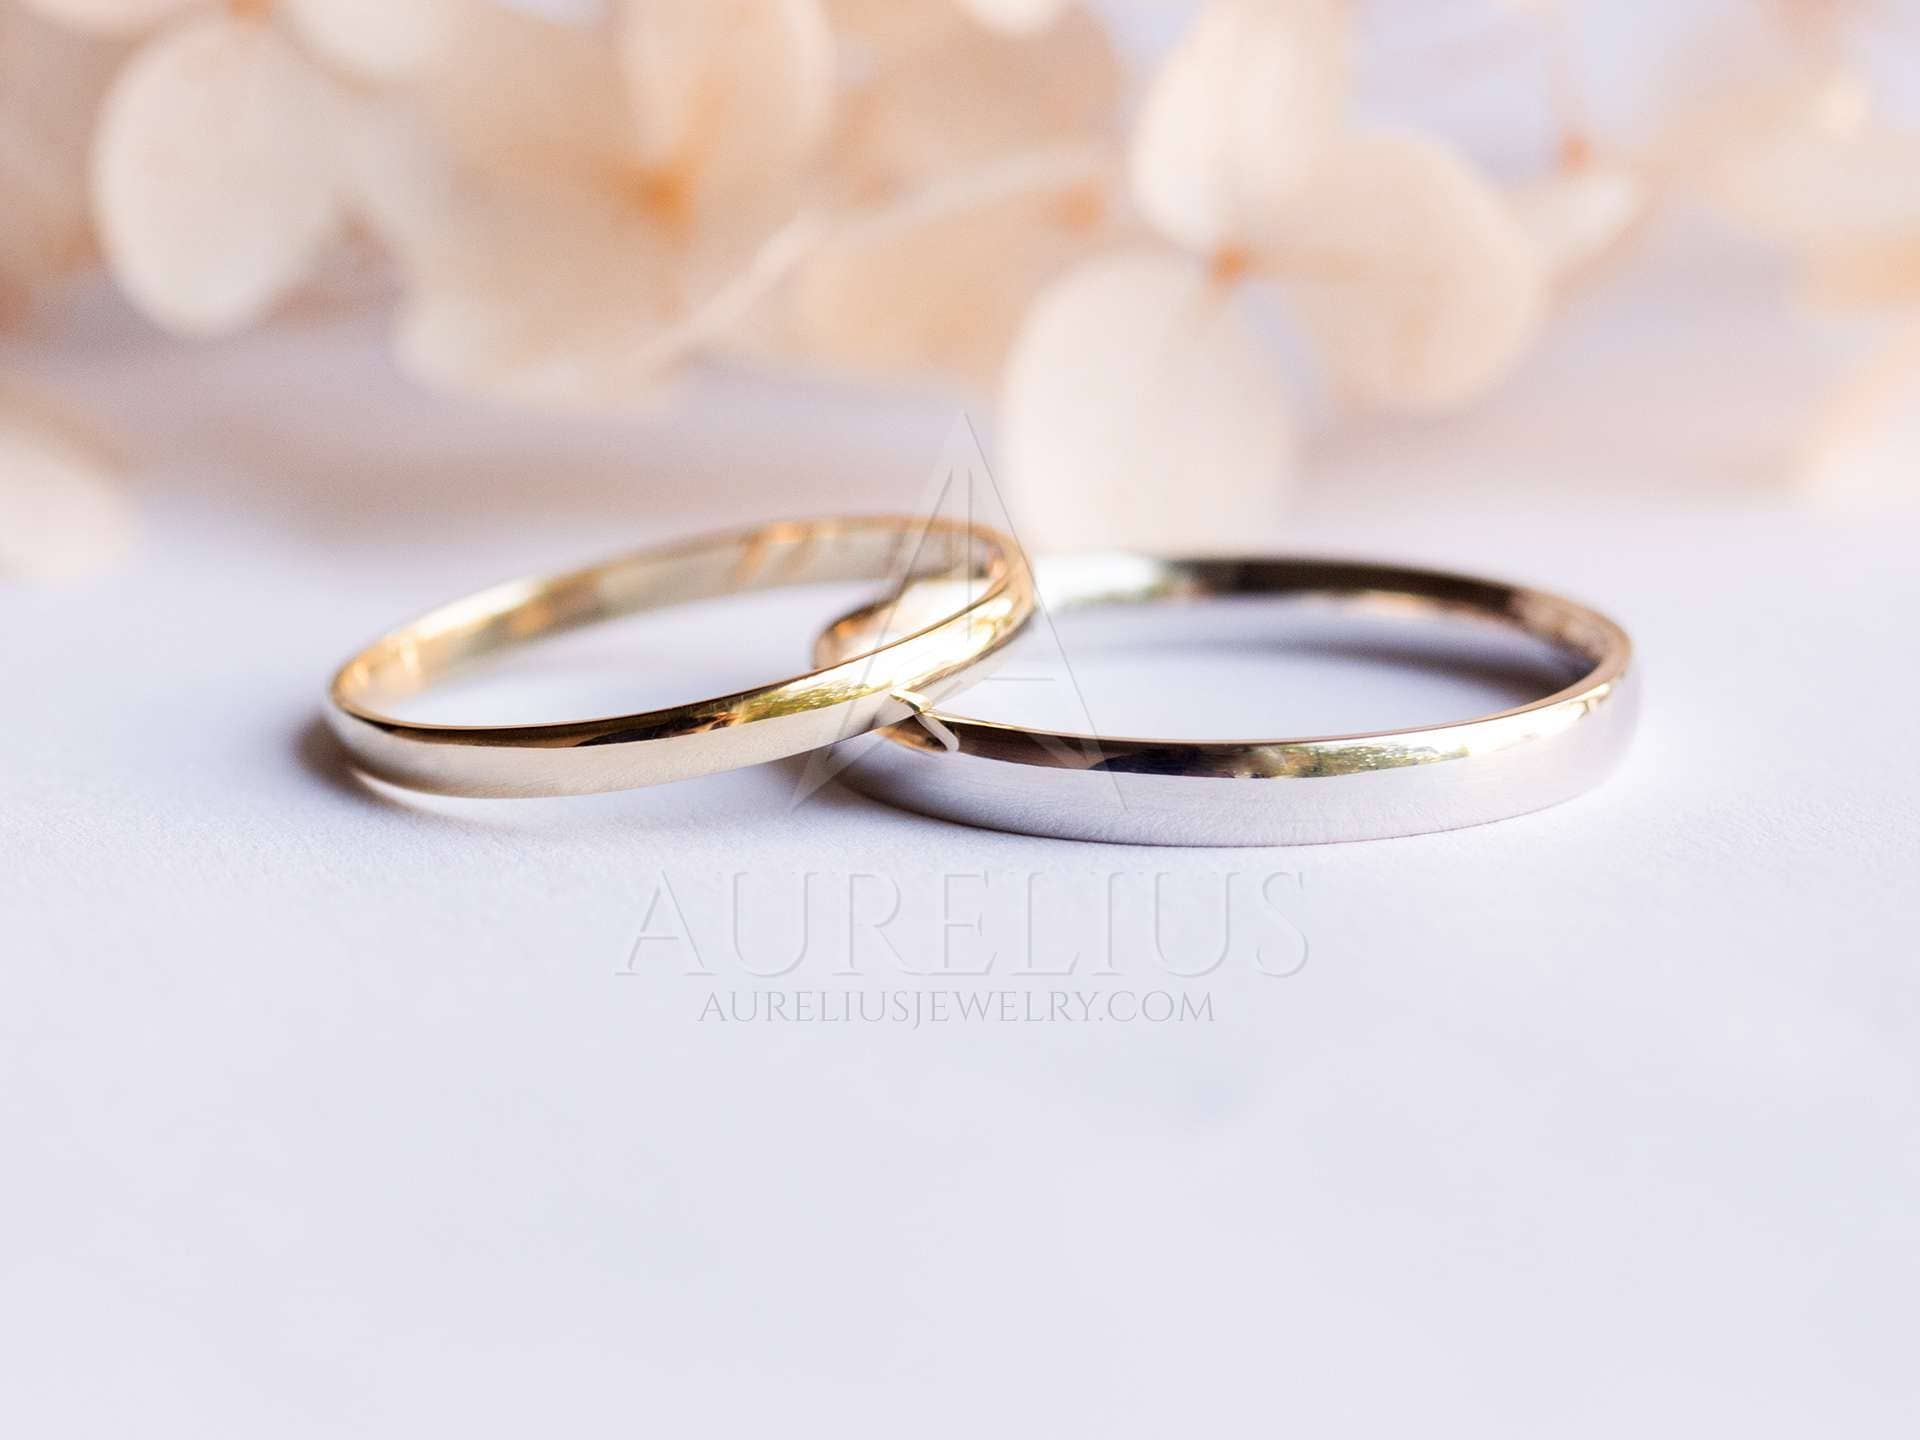 Unique Couples Ring Ideas | Rose gold wedding ring sets, Wedding rings rose  gold, Morganite engagement ring set